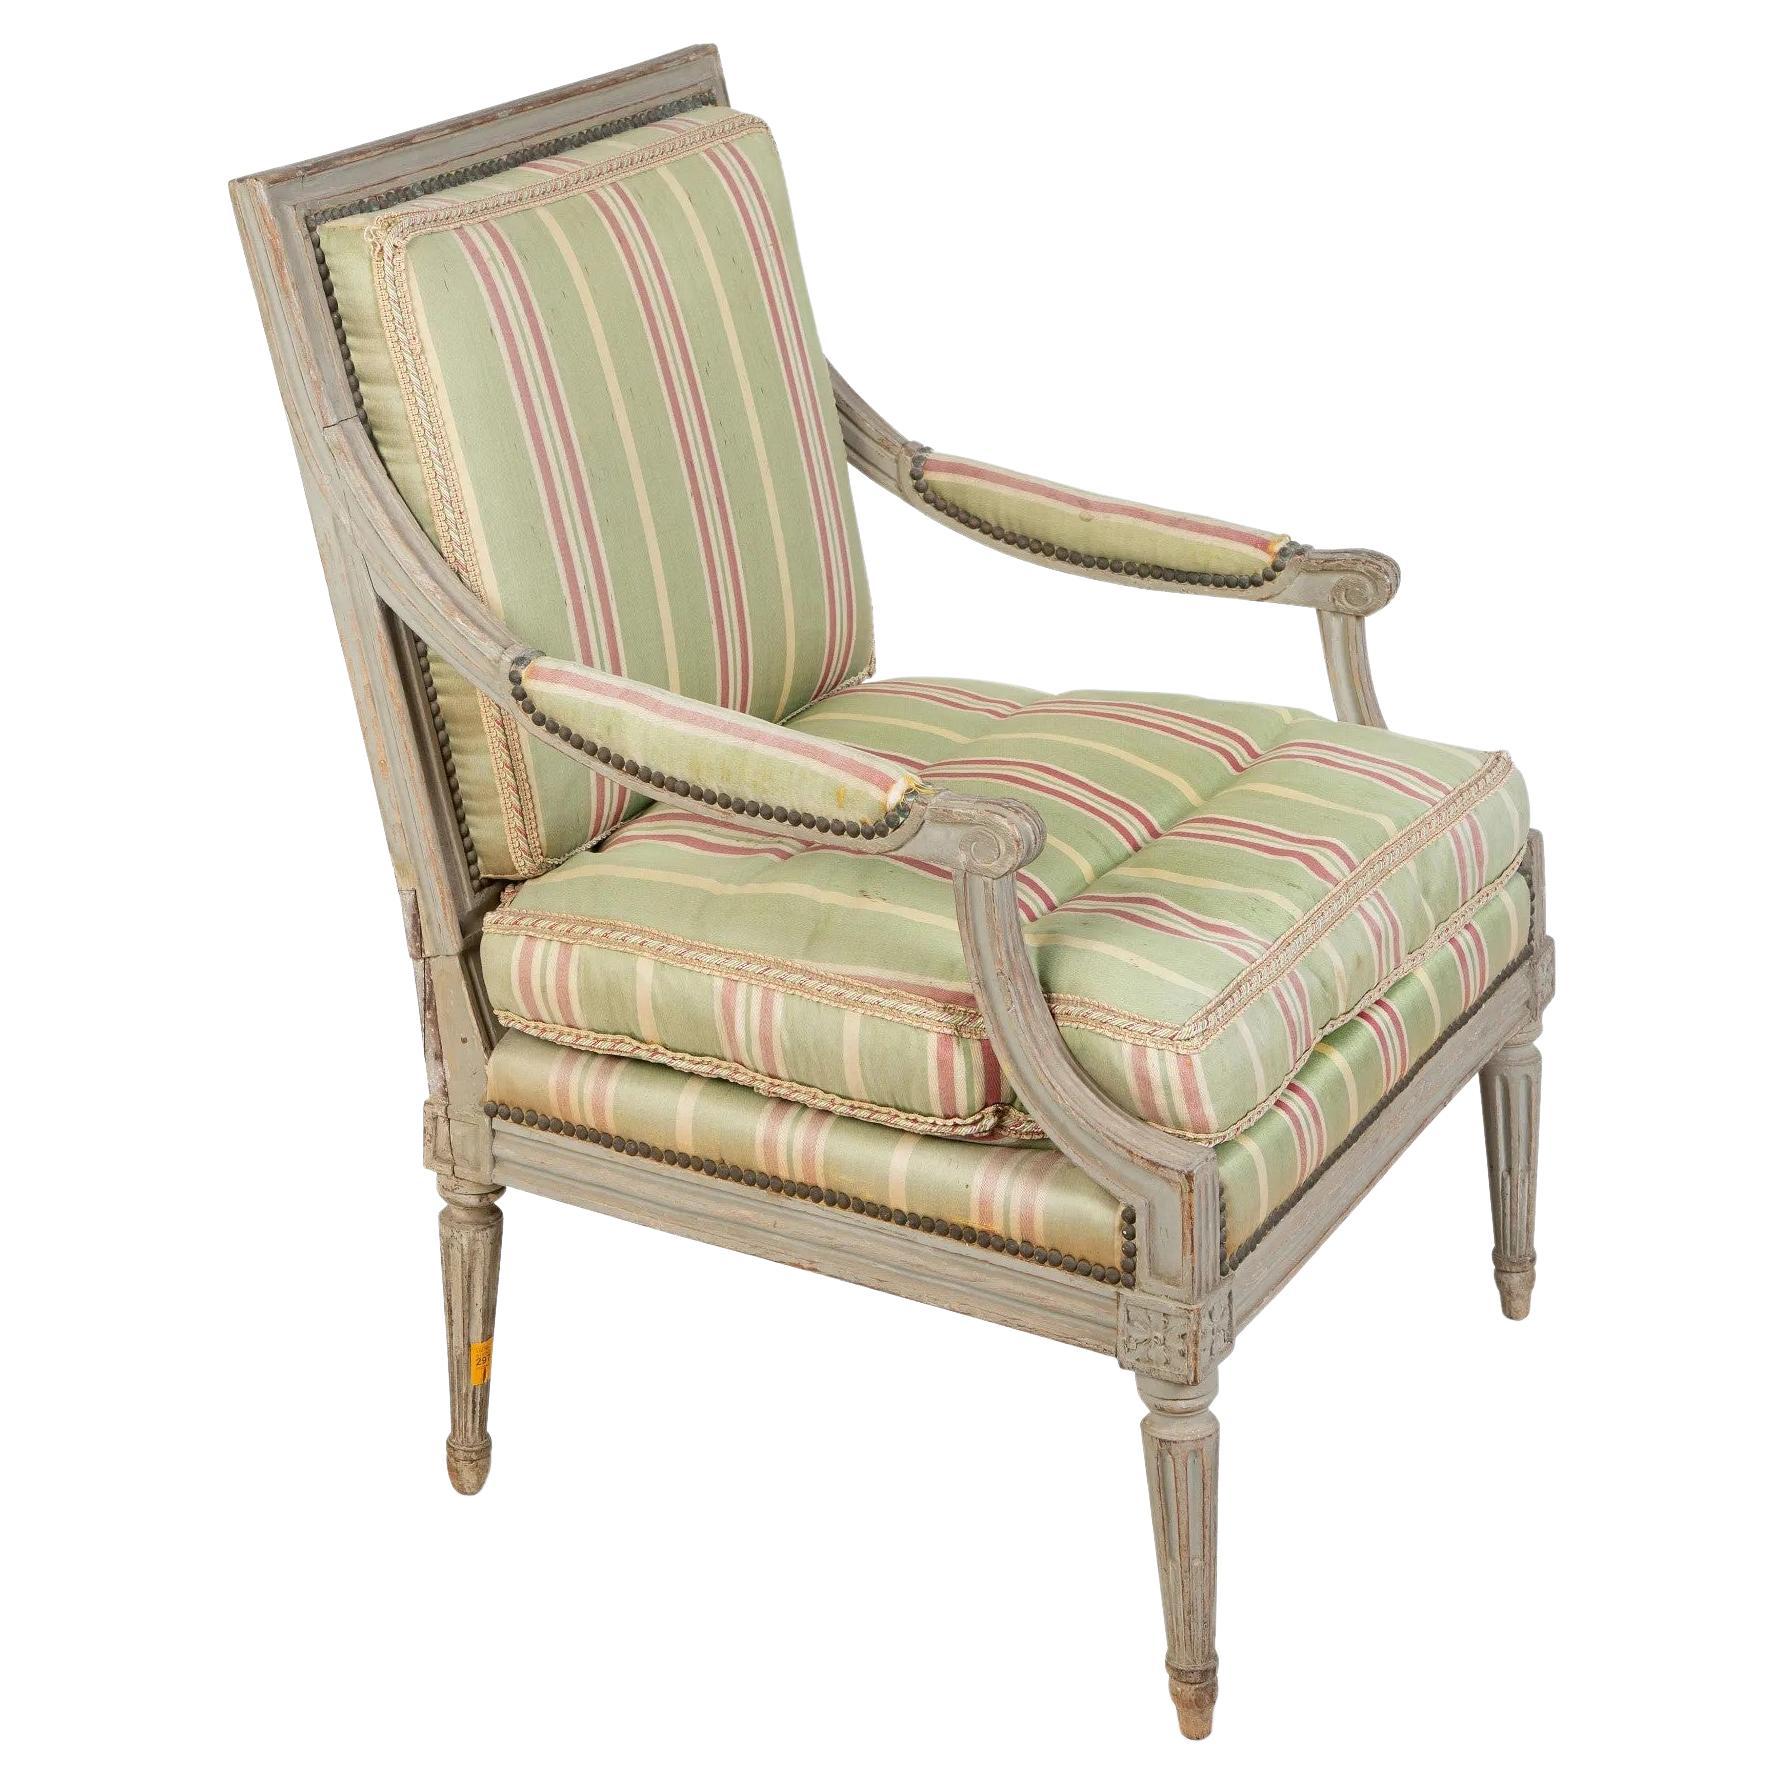 18th Century Louis XVI Fauteuil in Original Painted Finish For Sale